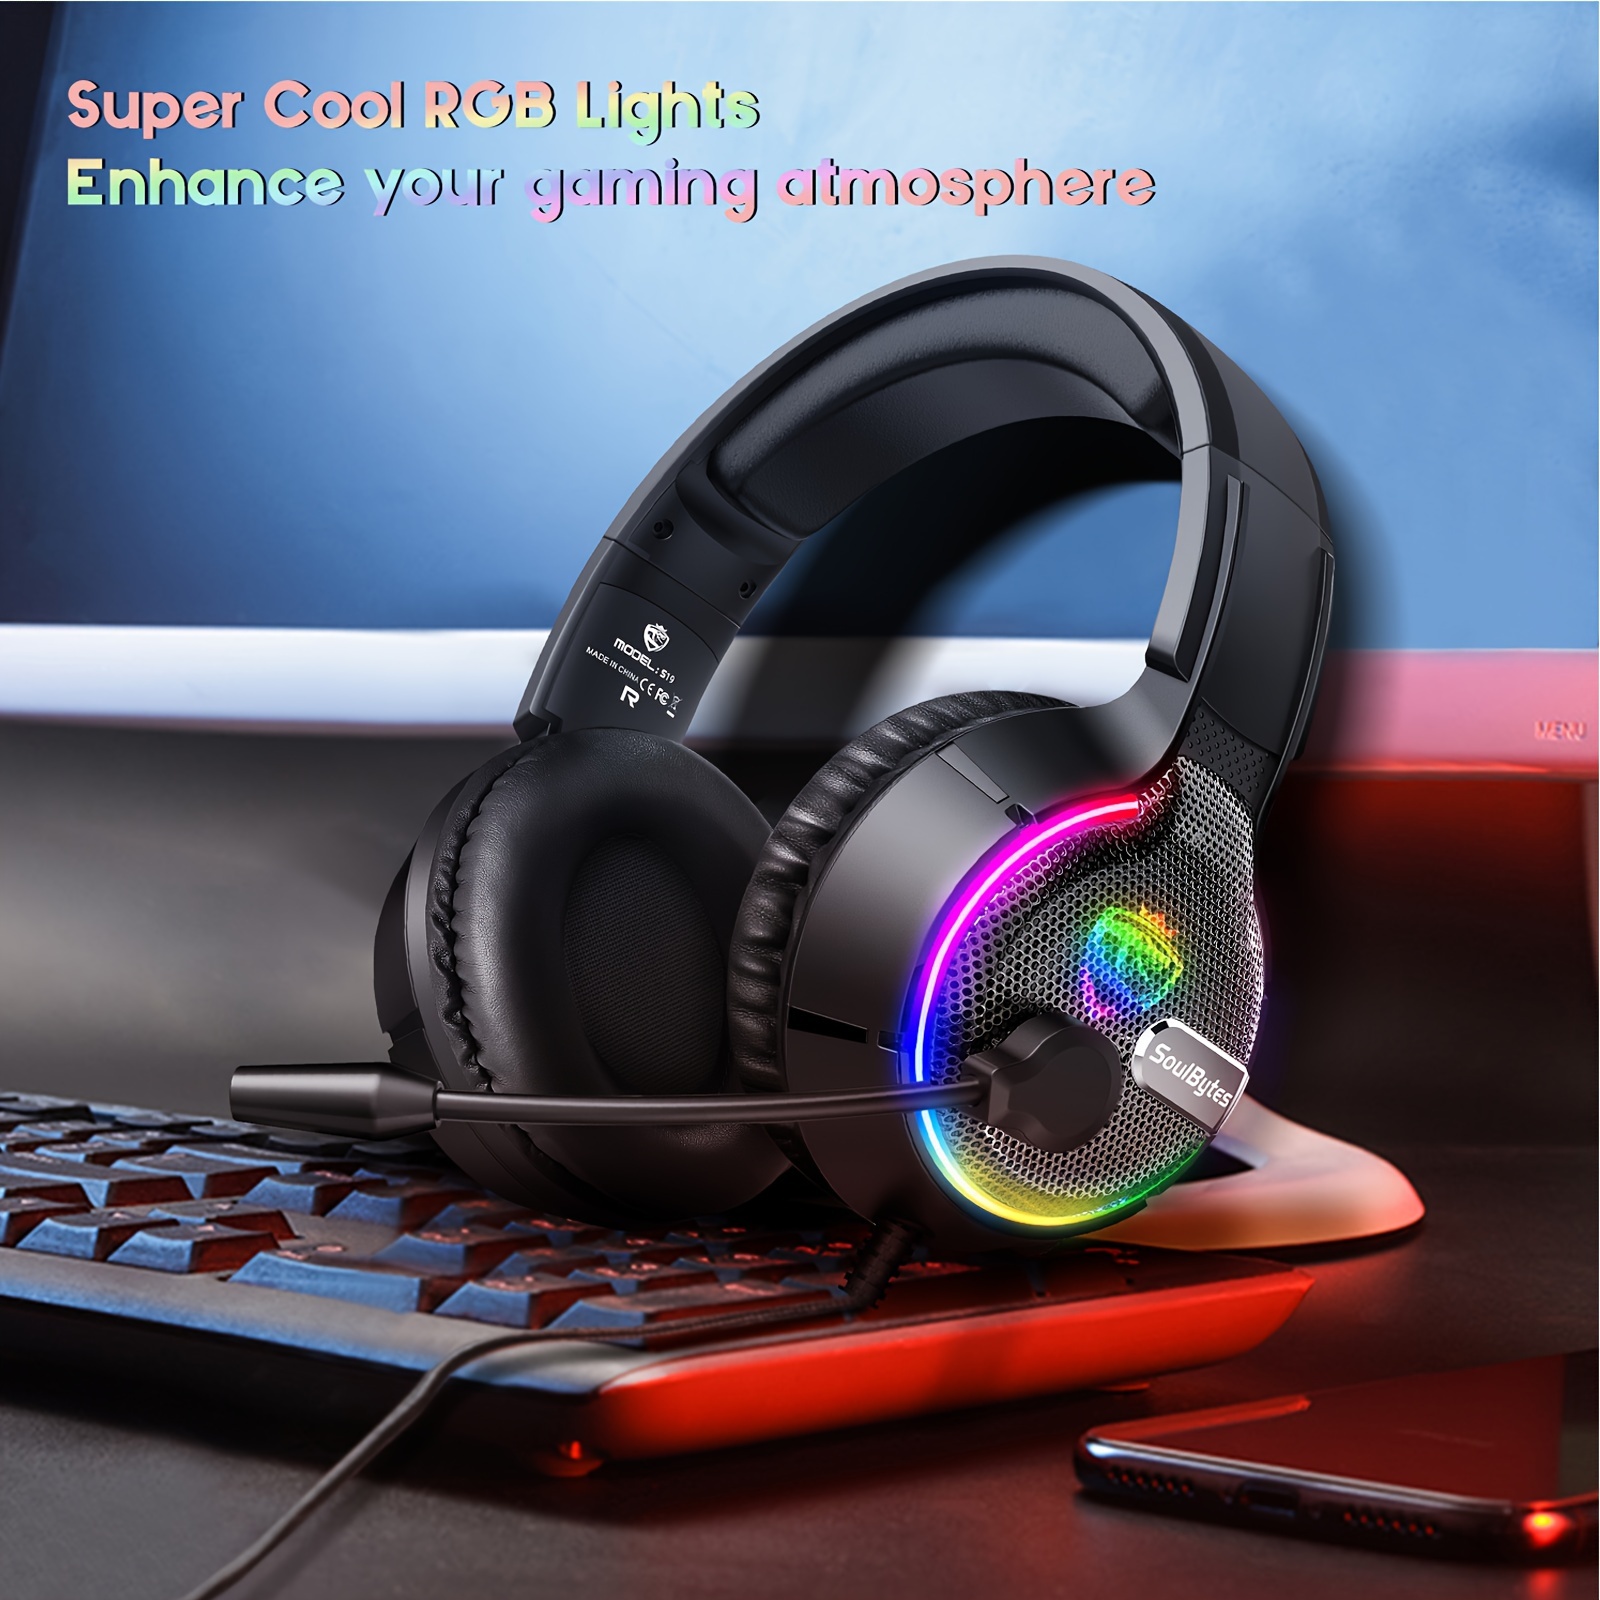 

Soulbytes Gaming Headset For One, Ps4, Pc, Over Ear Gaming Headphones With Noise Cancelling Mic Rgb Led Light, Stereo Bass Surround, Soft Memory Earmuffs For Ps5, Smart Phone, Laptops, Tablet